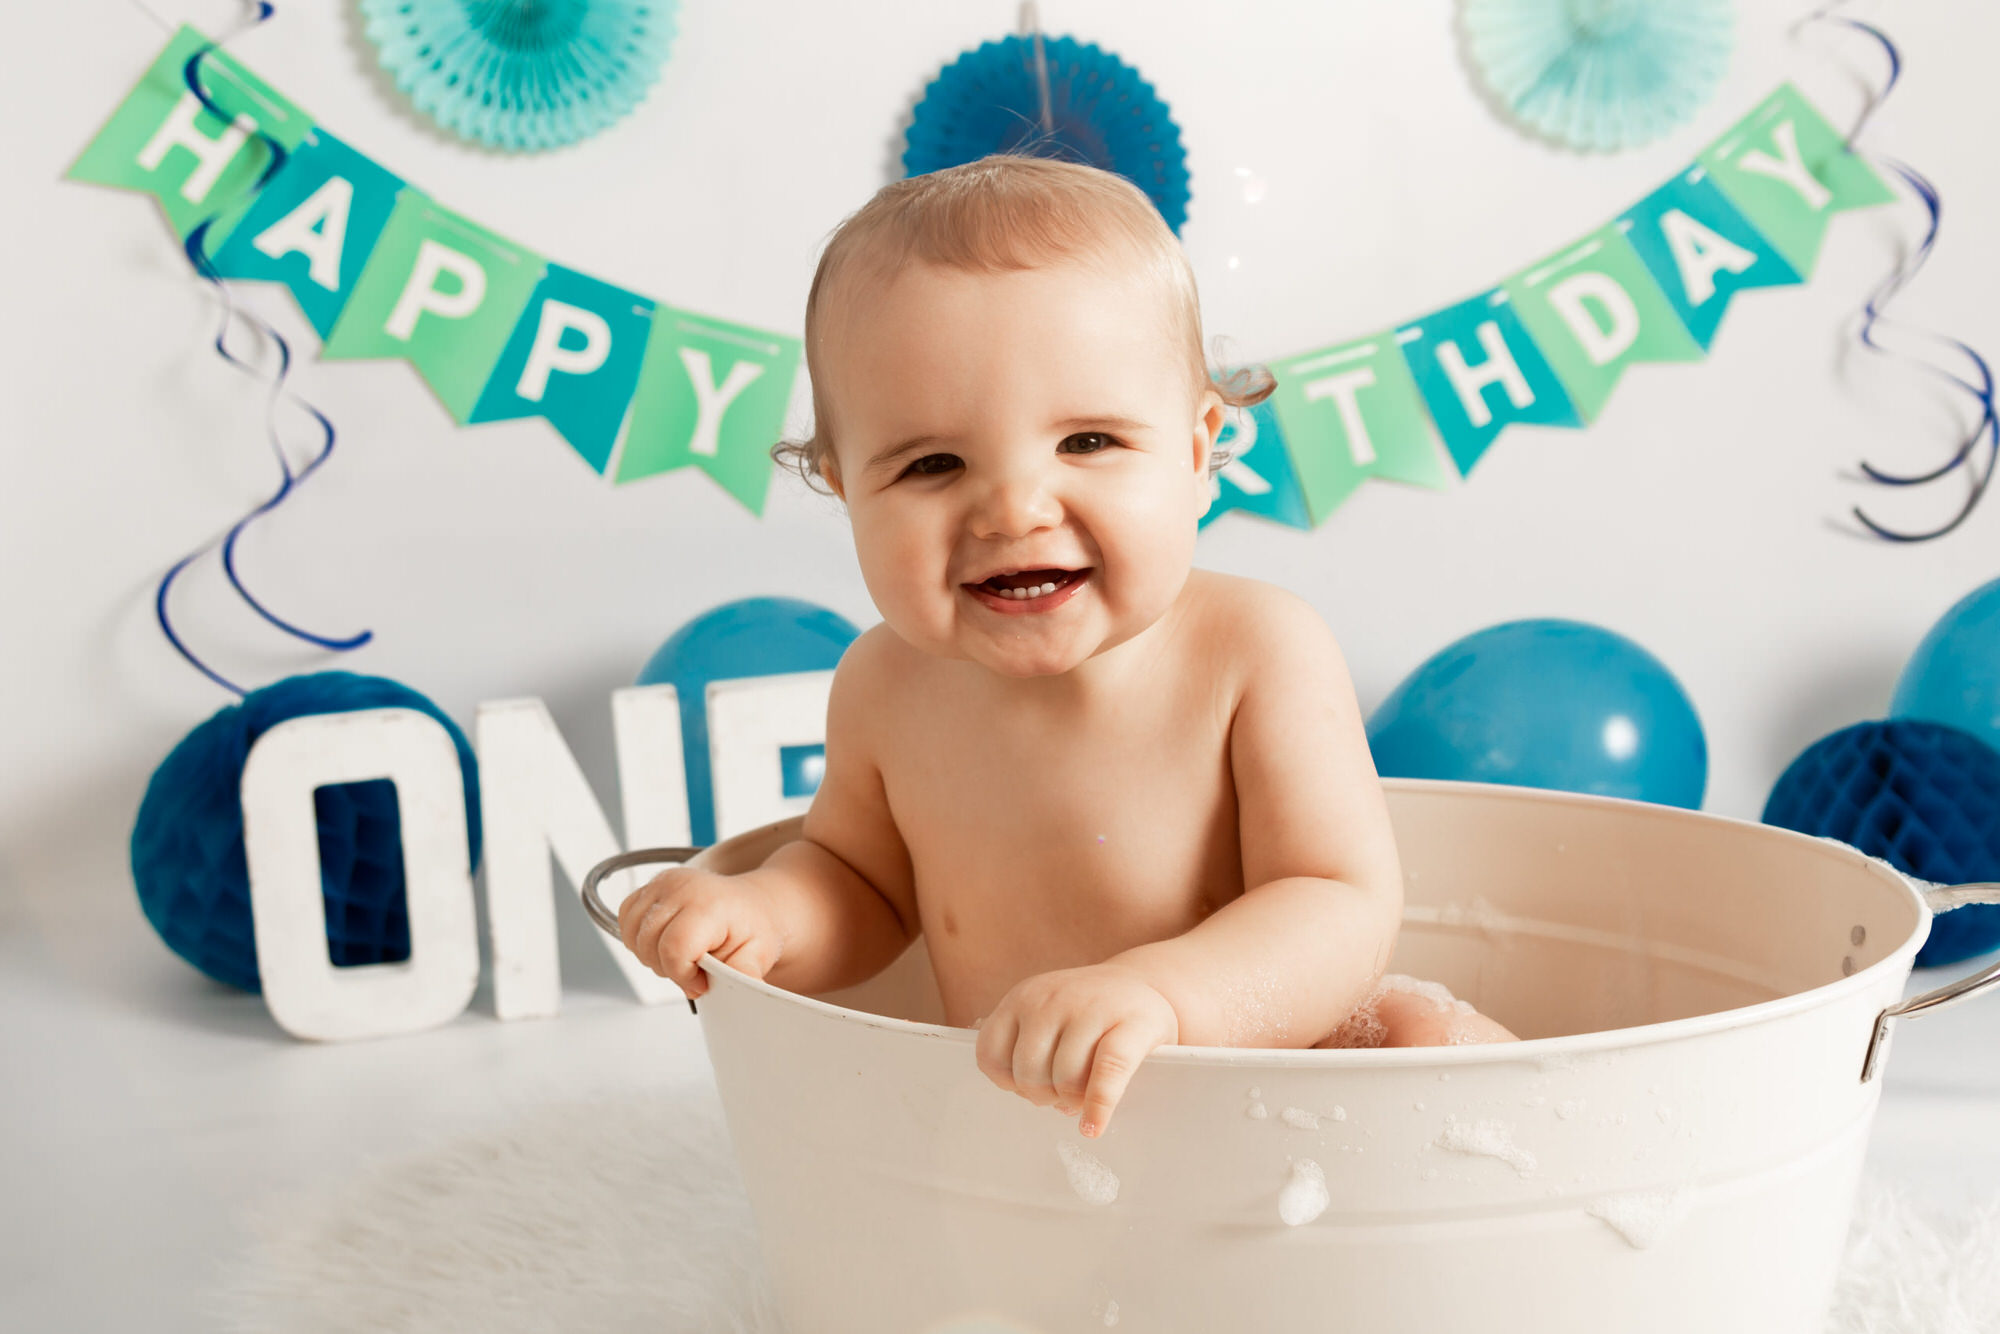 What is a 1st birthday cake smash?